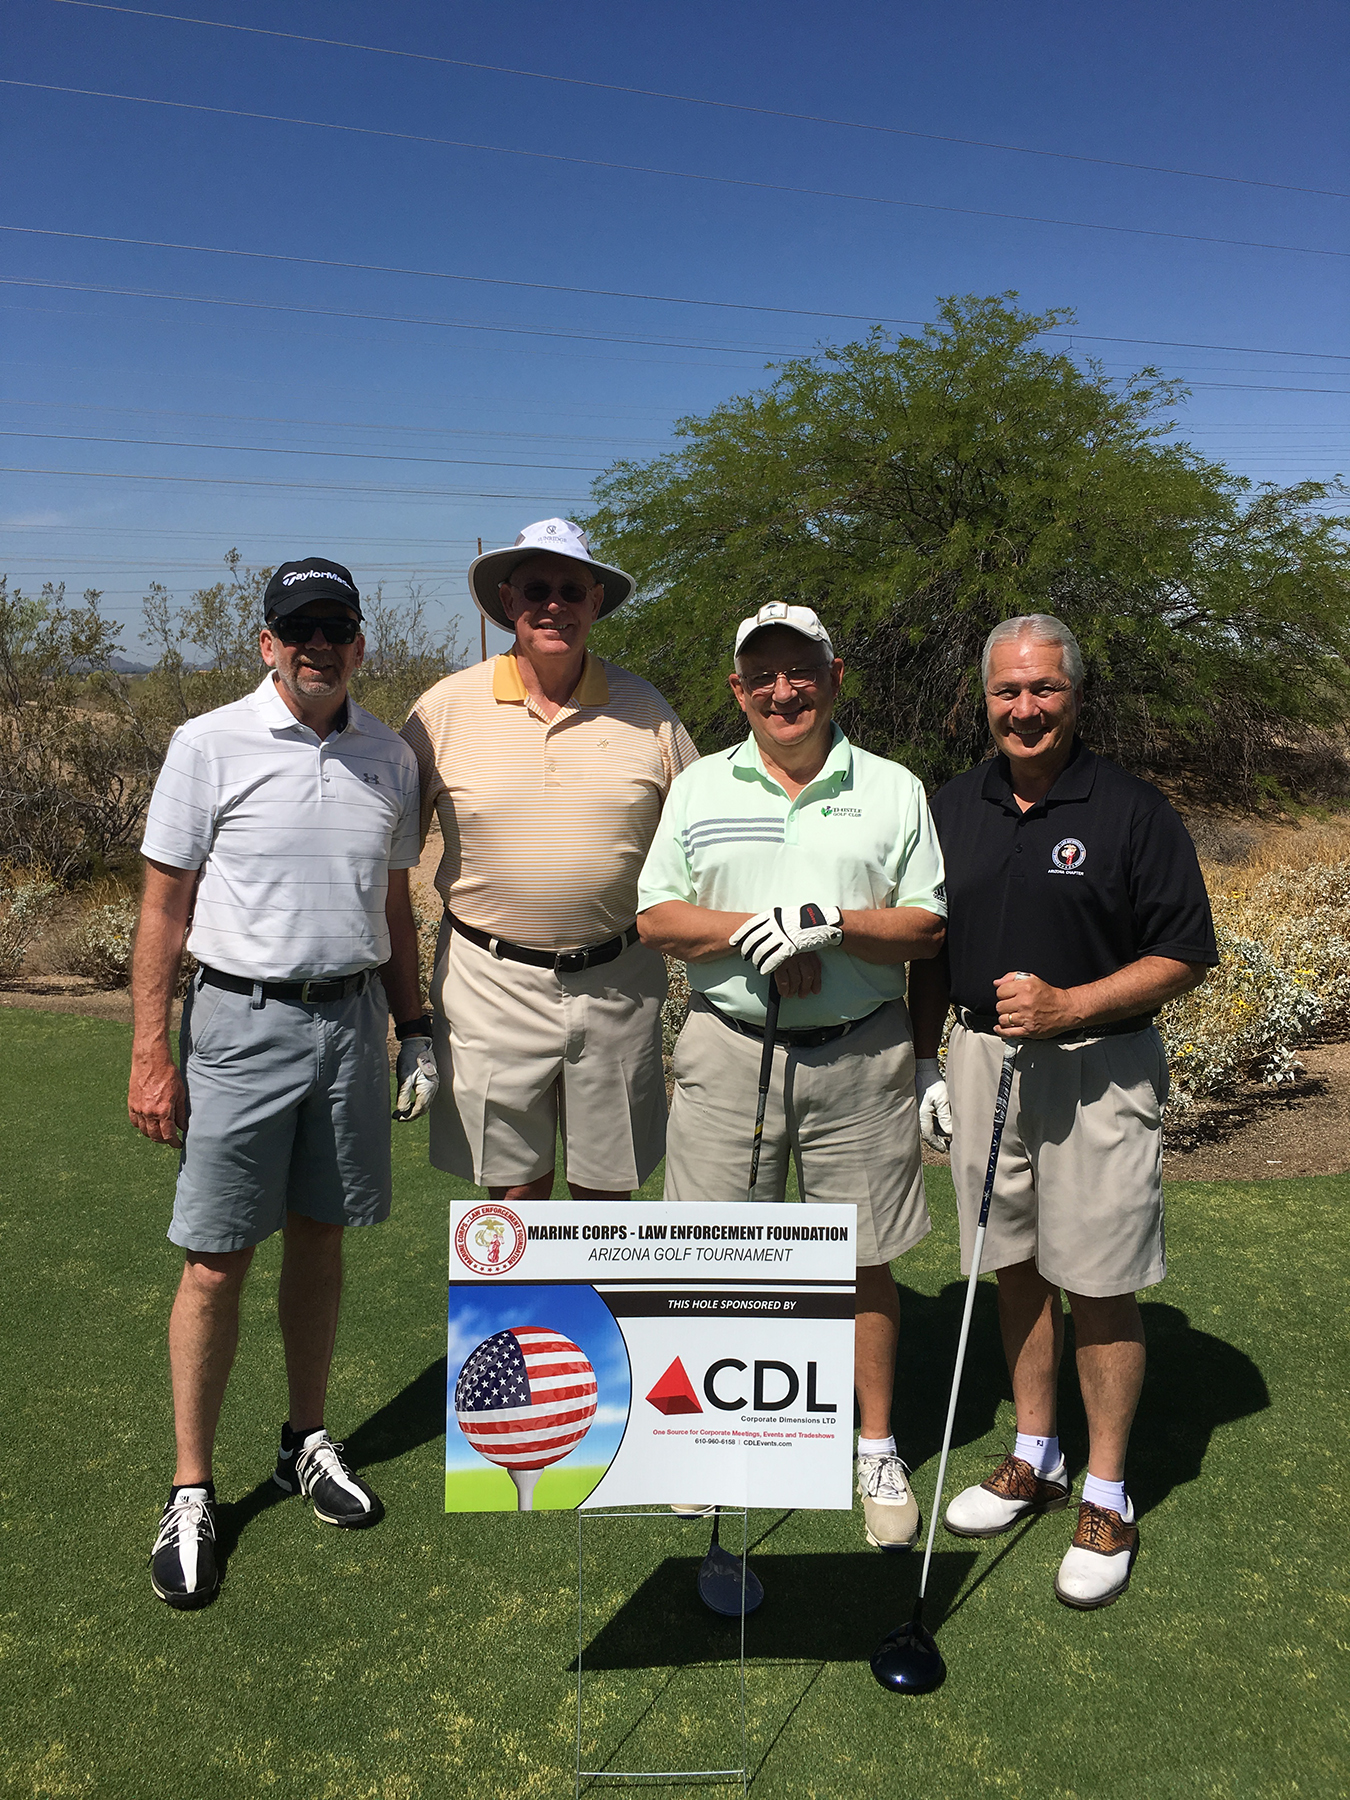  Foursome of Terry Sullivan, Bob Geriot, Jake Egan, John Bennett. Bob Geriot is the owner of CDL (see sponsor sign in photo) and the Golf Shirt Sponsor for this year (and last year's) tournament 